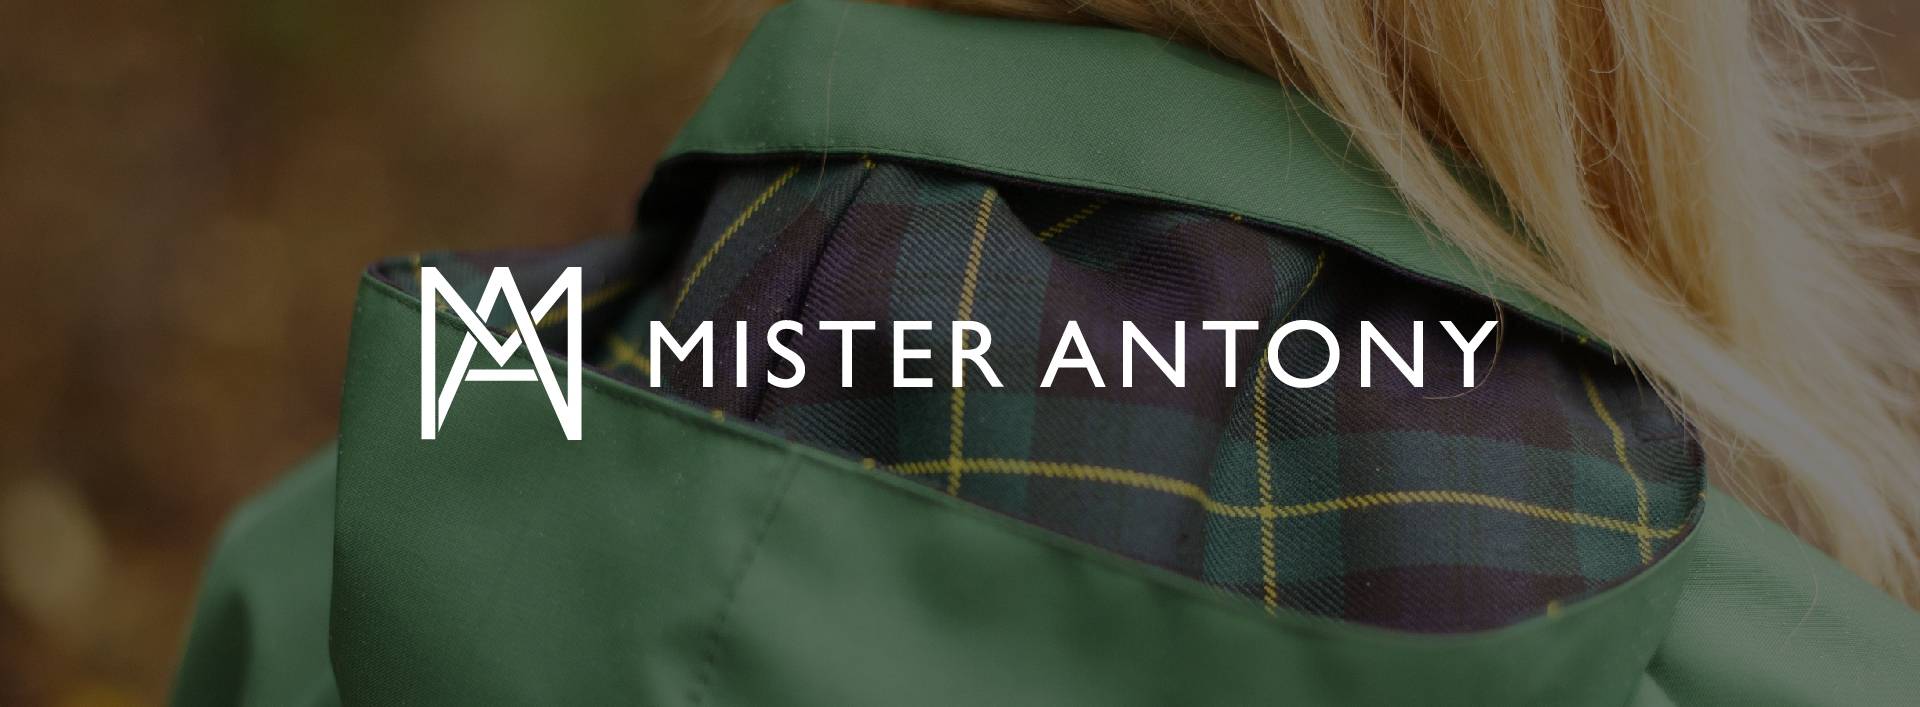 Mr Anthony logo in front of a woman wearing a green anorak